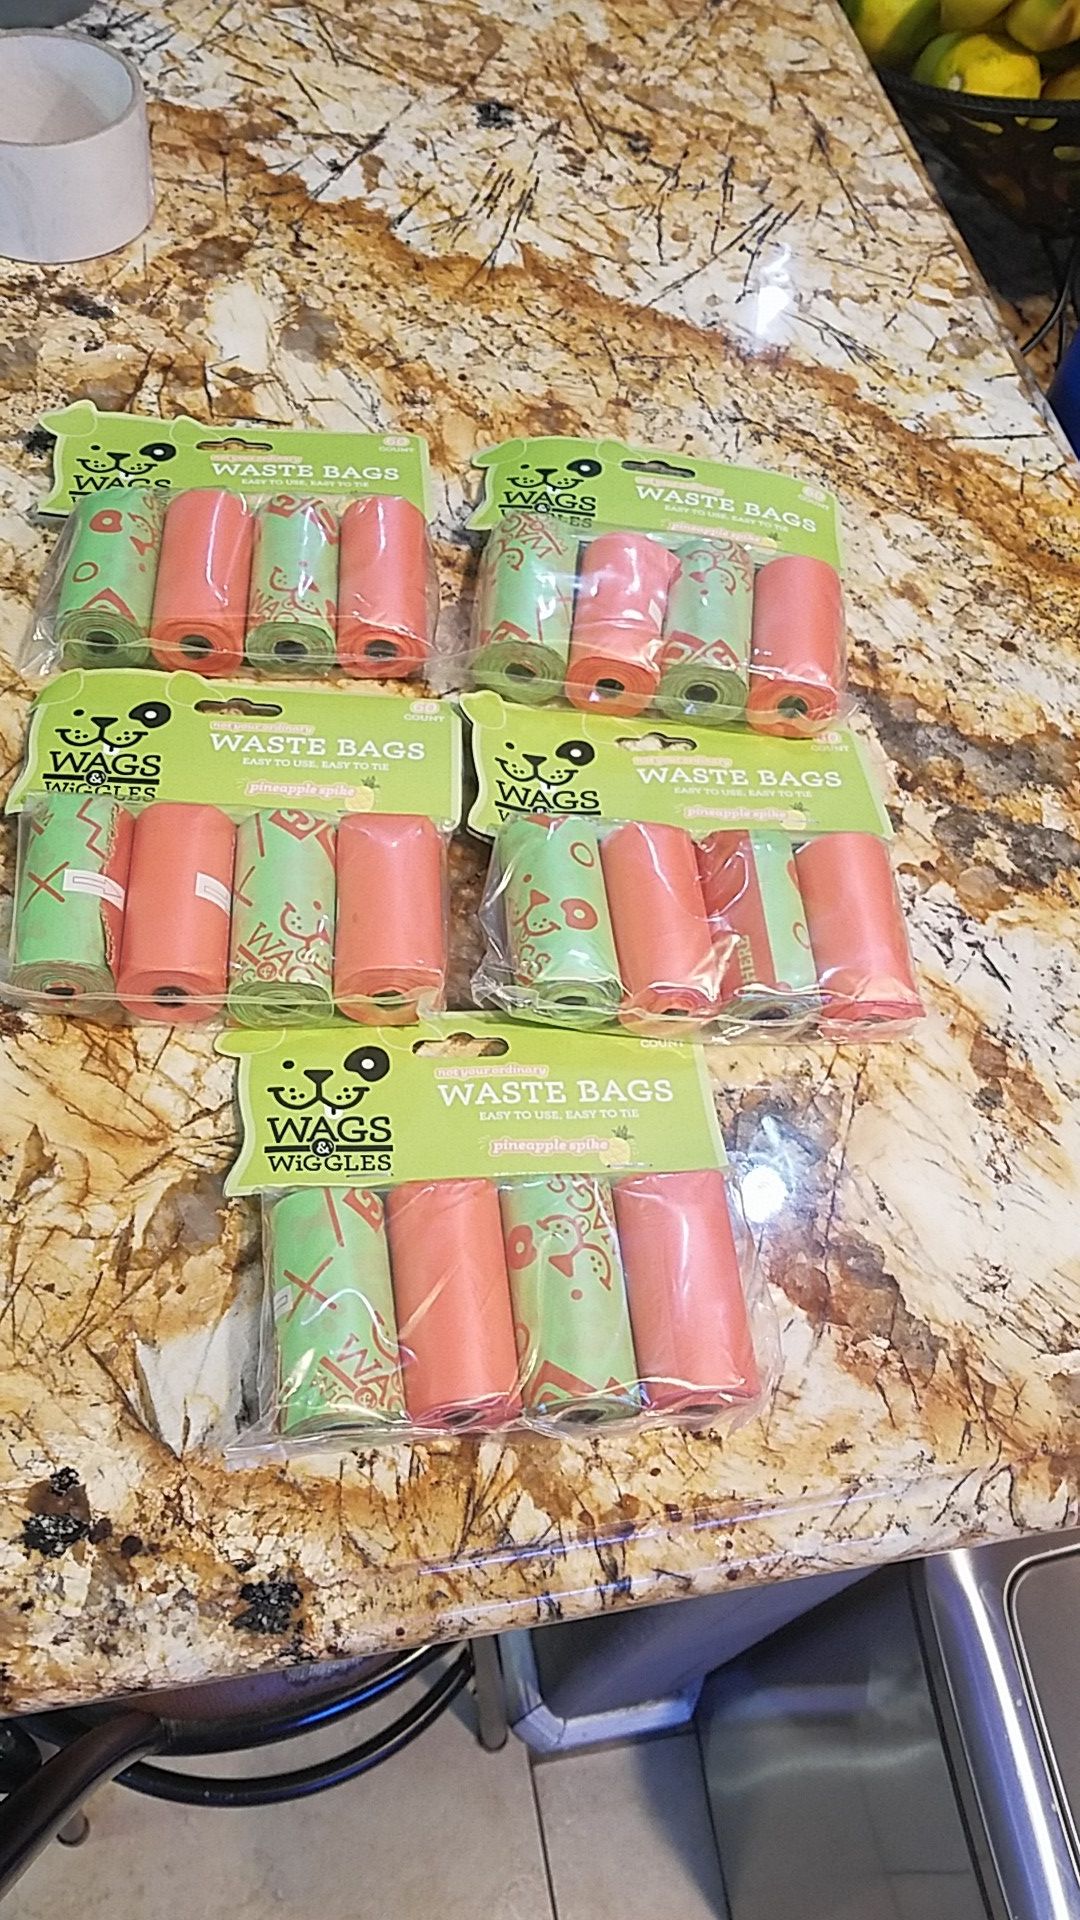 Wags & Wiggles Waste Bags For Dogs | Dog Poop Bags in Multiple Scents and Sizes 60ct each 300 total for $10